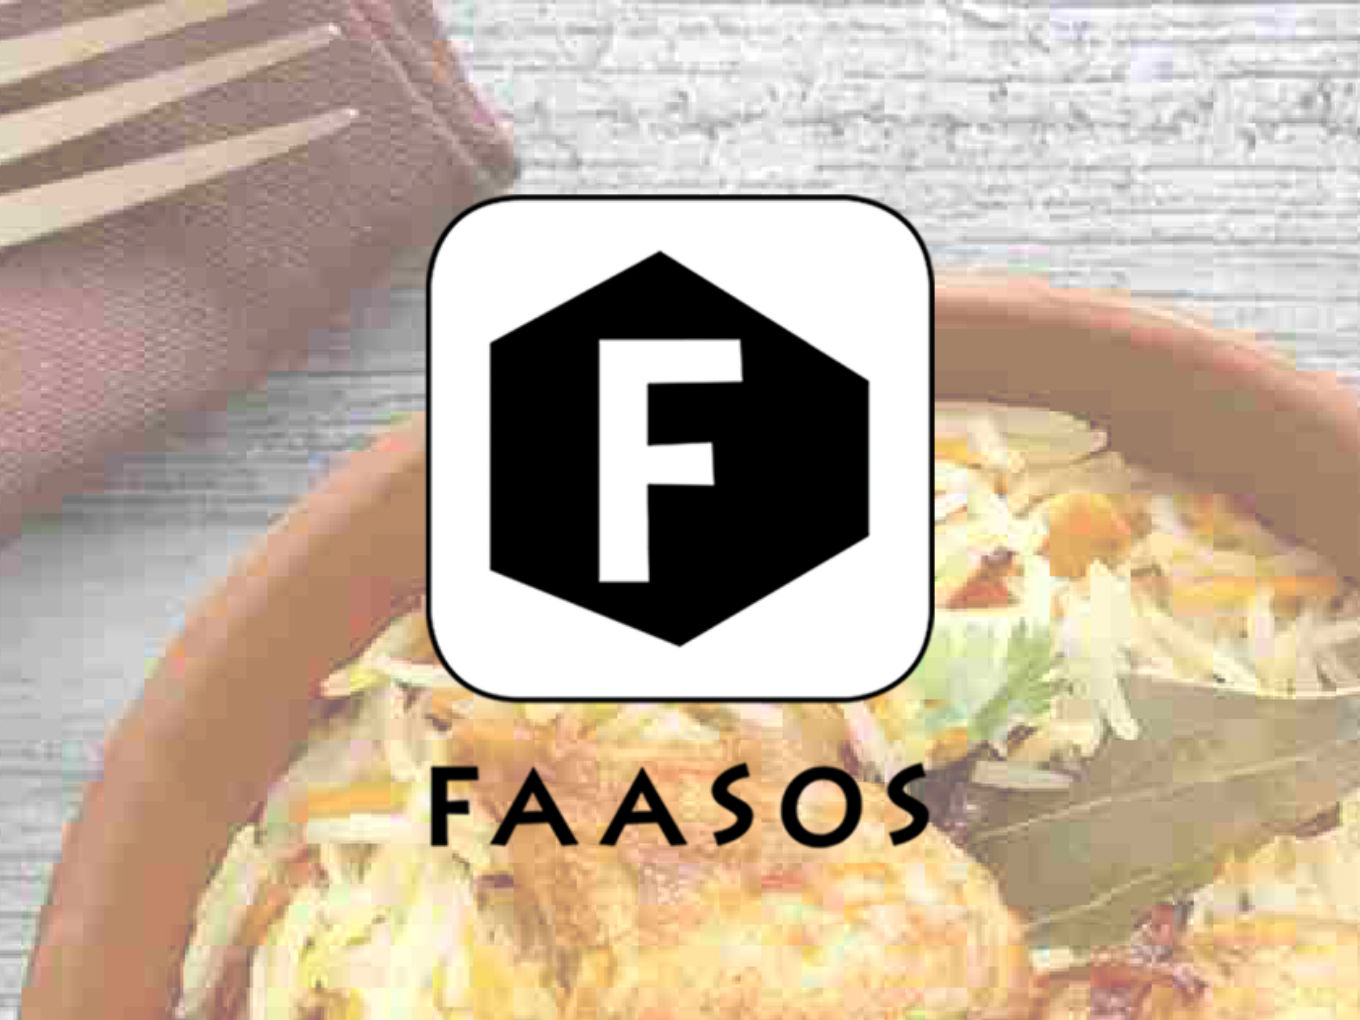 Coatue May Lead $120 Mn Funding In Faasos To Drive Global Expansion: Report